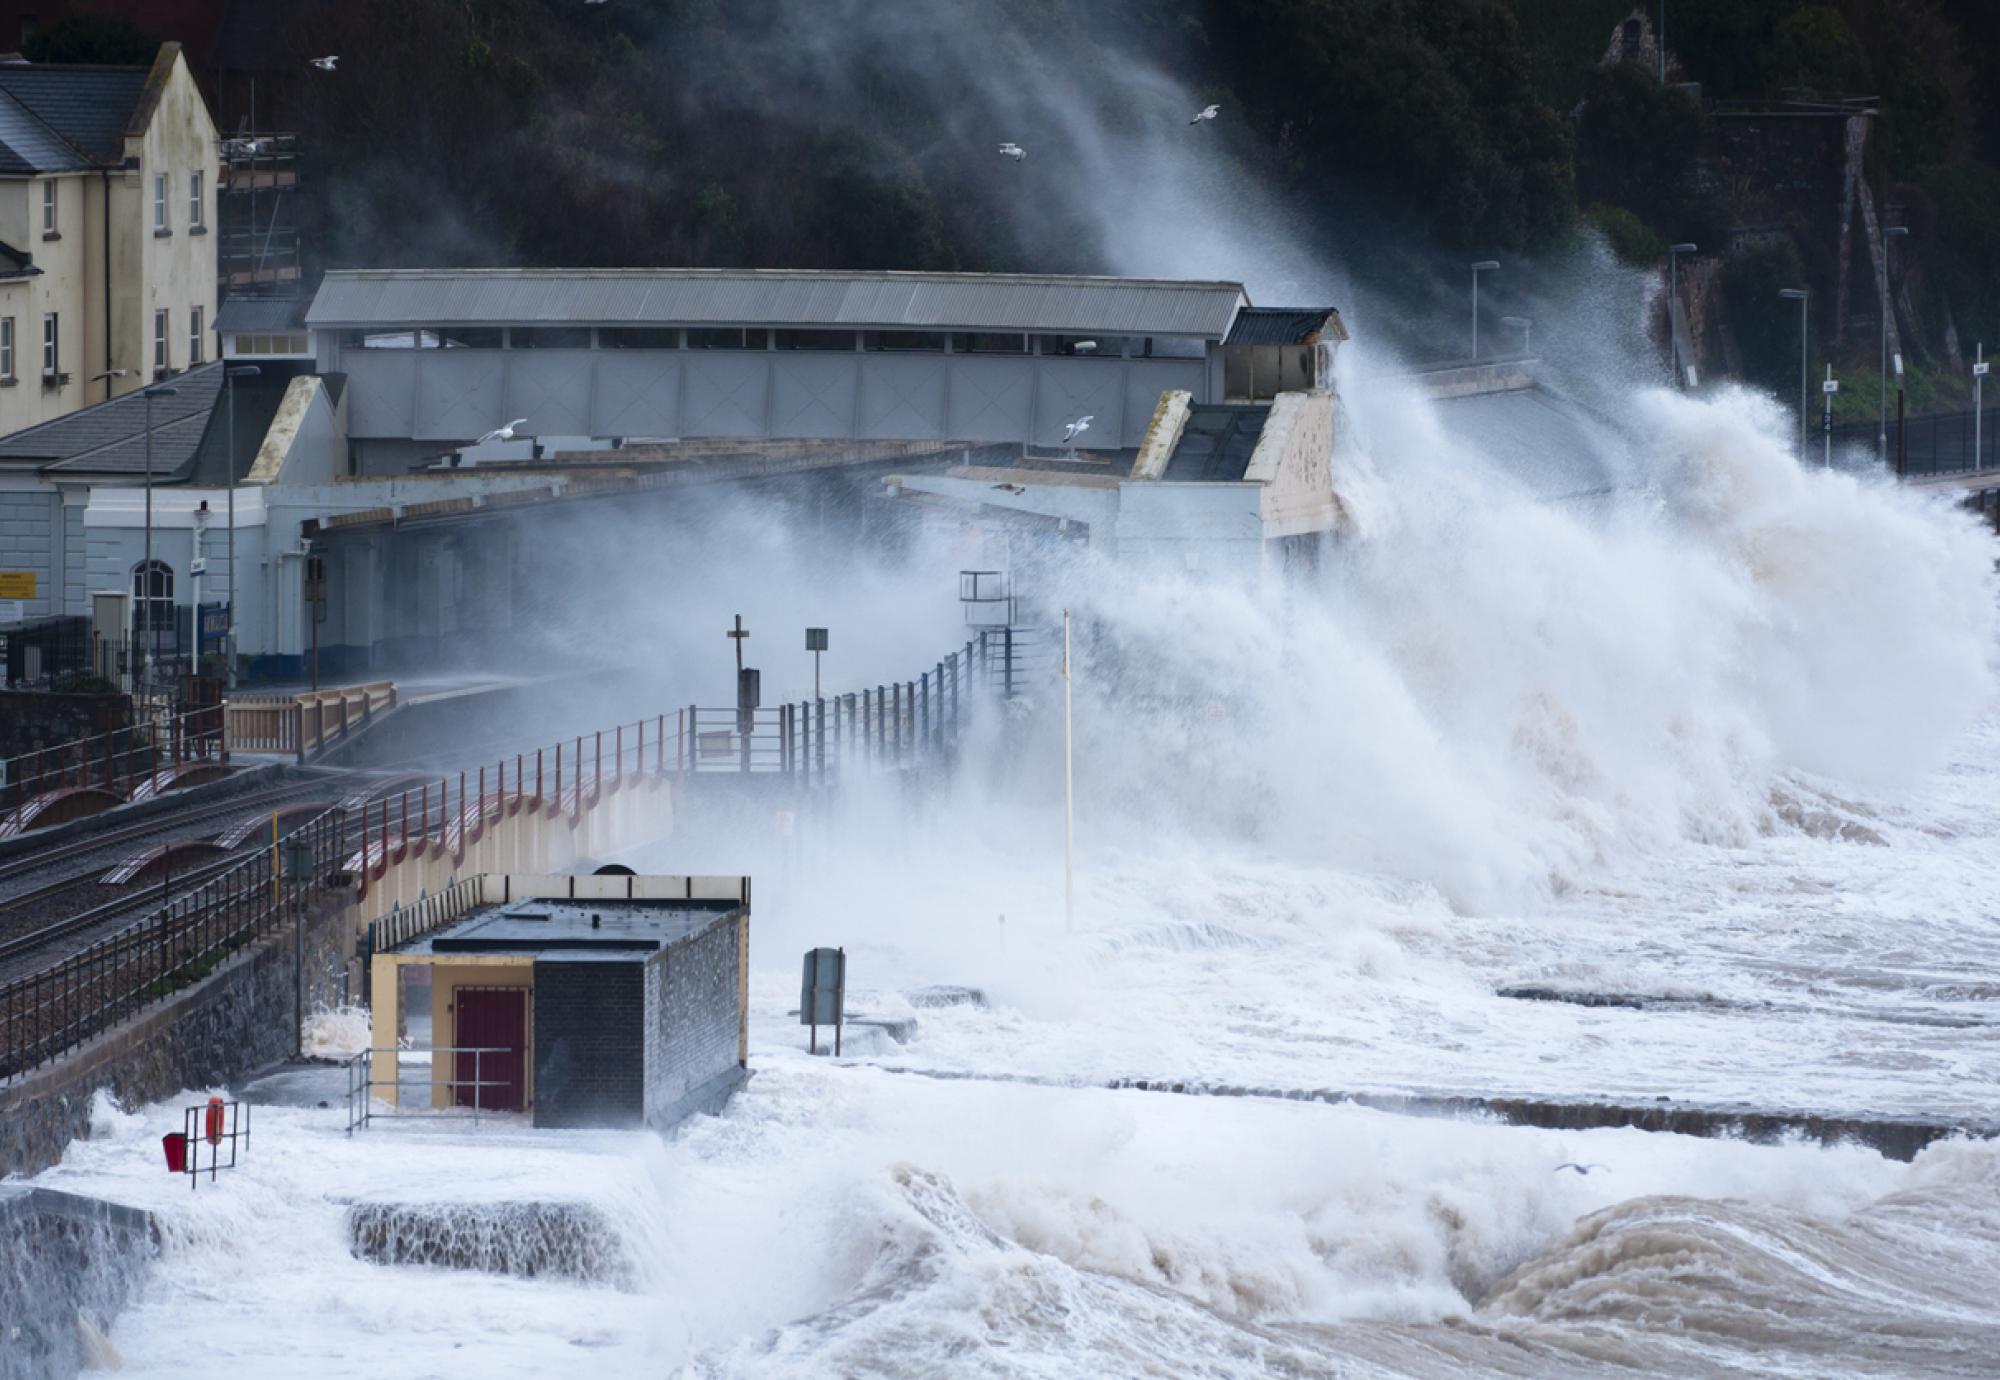 Damages to the rail lines in Dawlish due to extreme weather conditions, via Istock